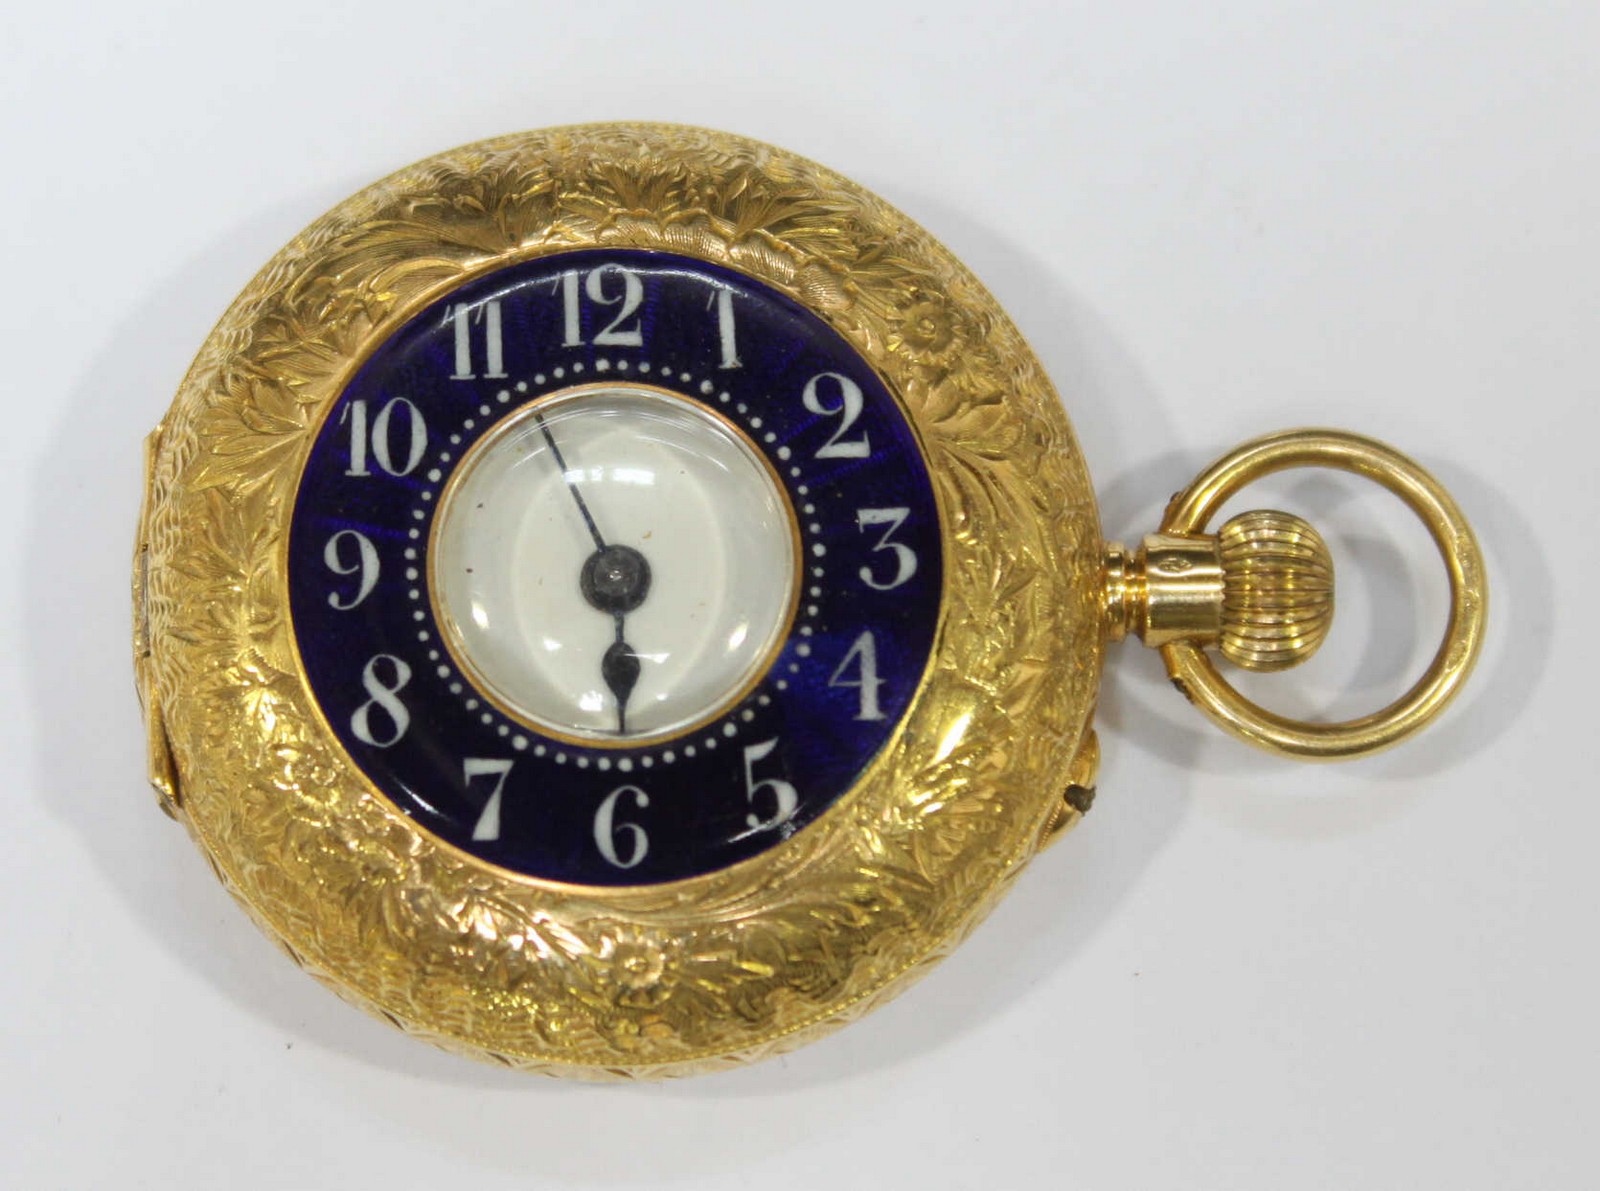 An 18ct gold engraved fob watch with blue enamelling to the face. - Image 2 of 2